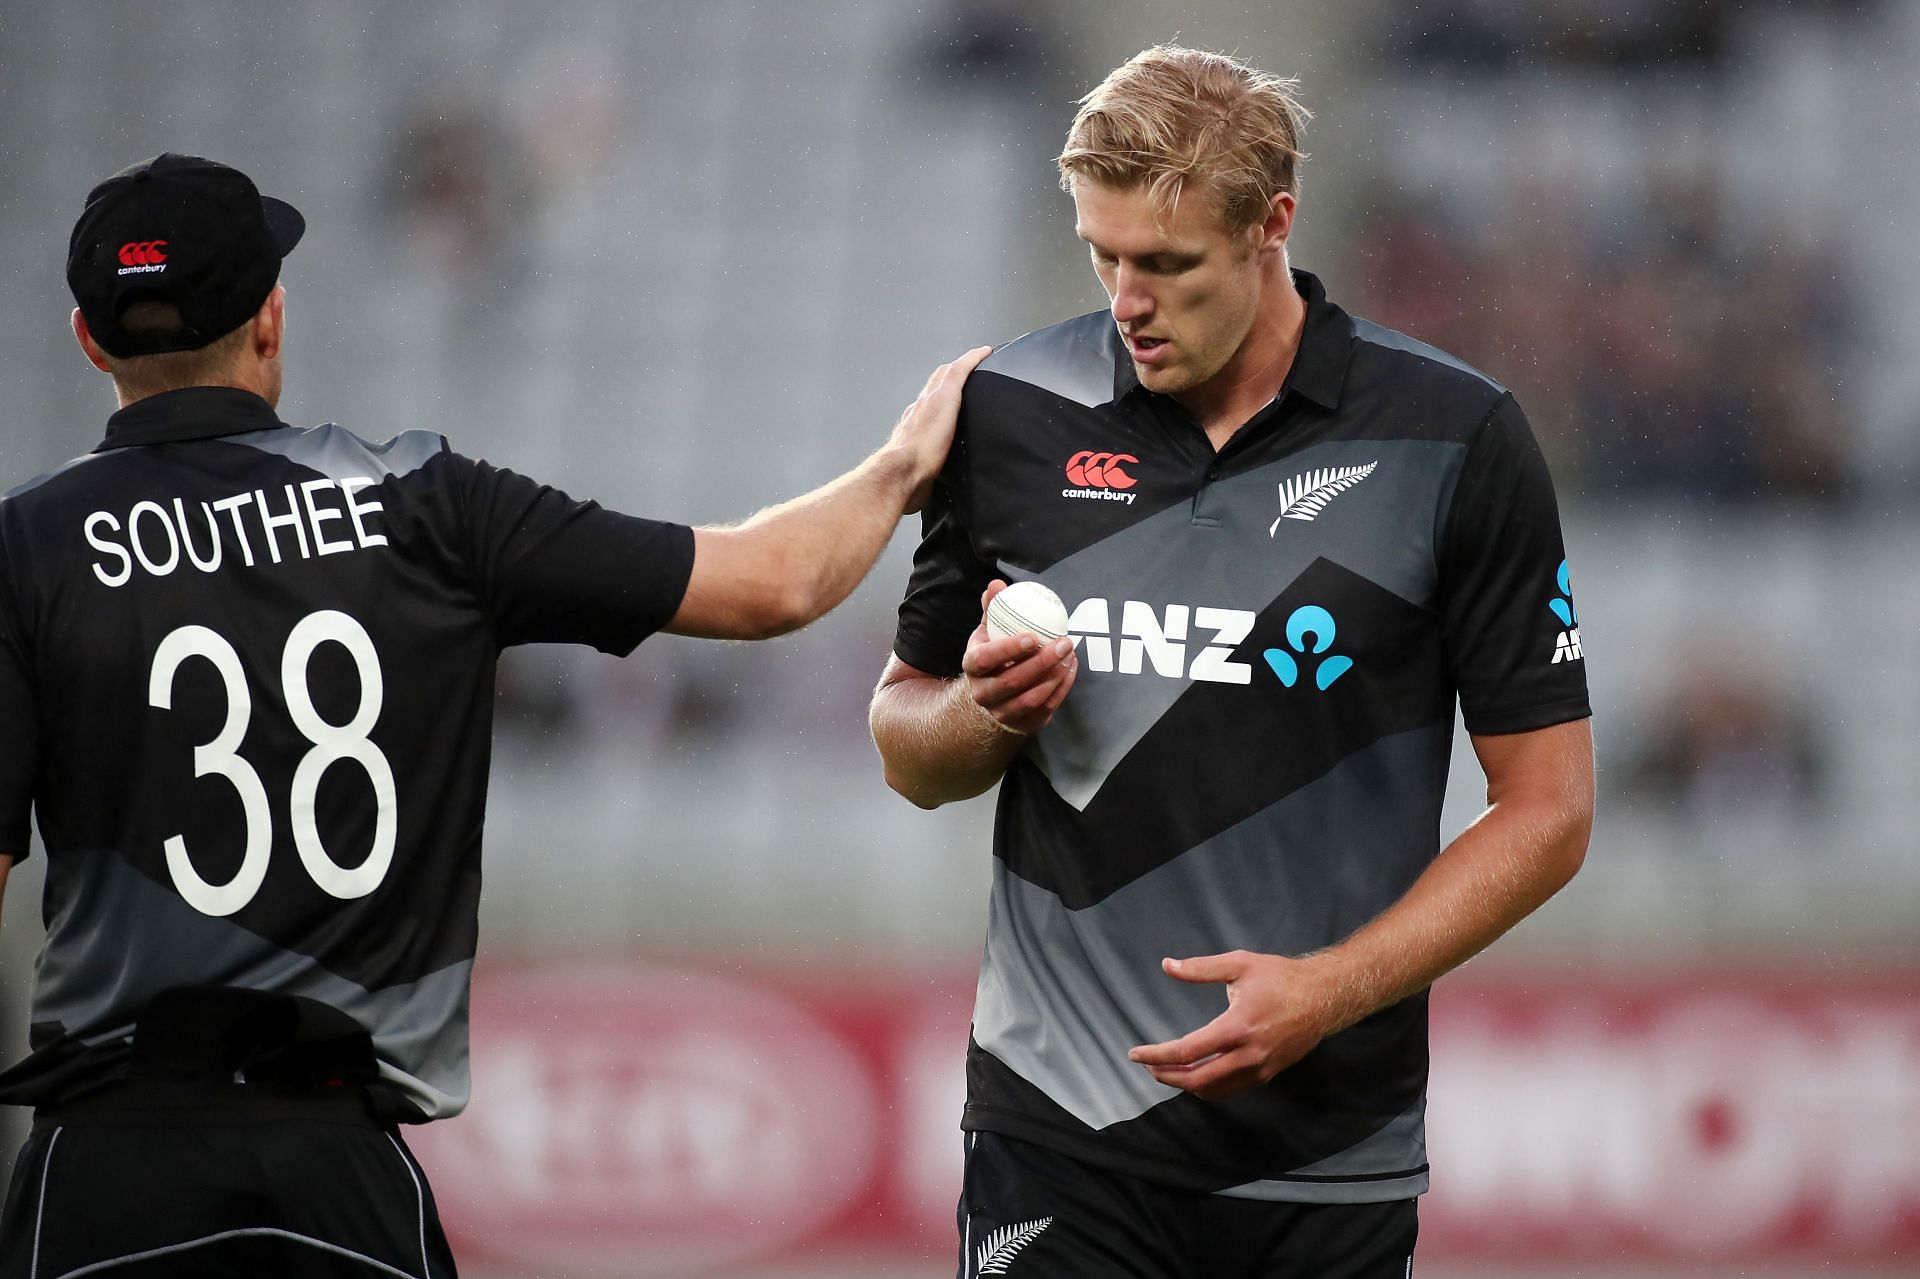 New Zealand v West Indies - T20 Game 1